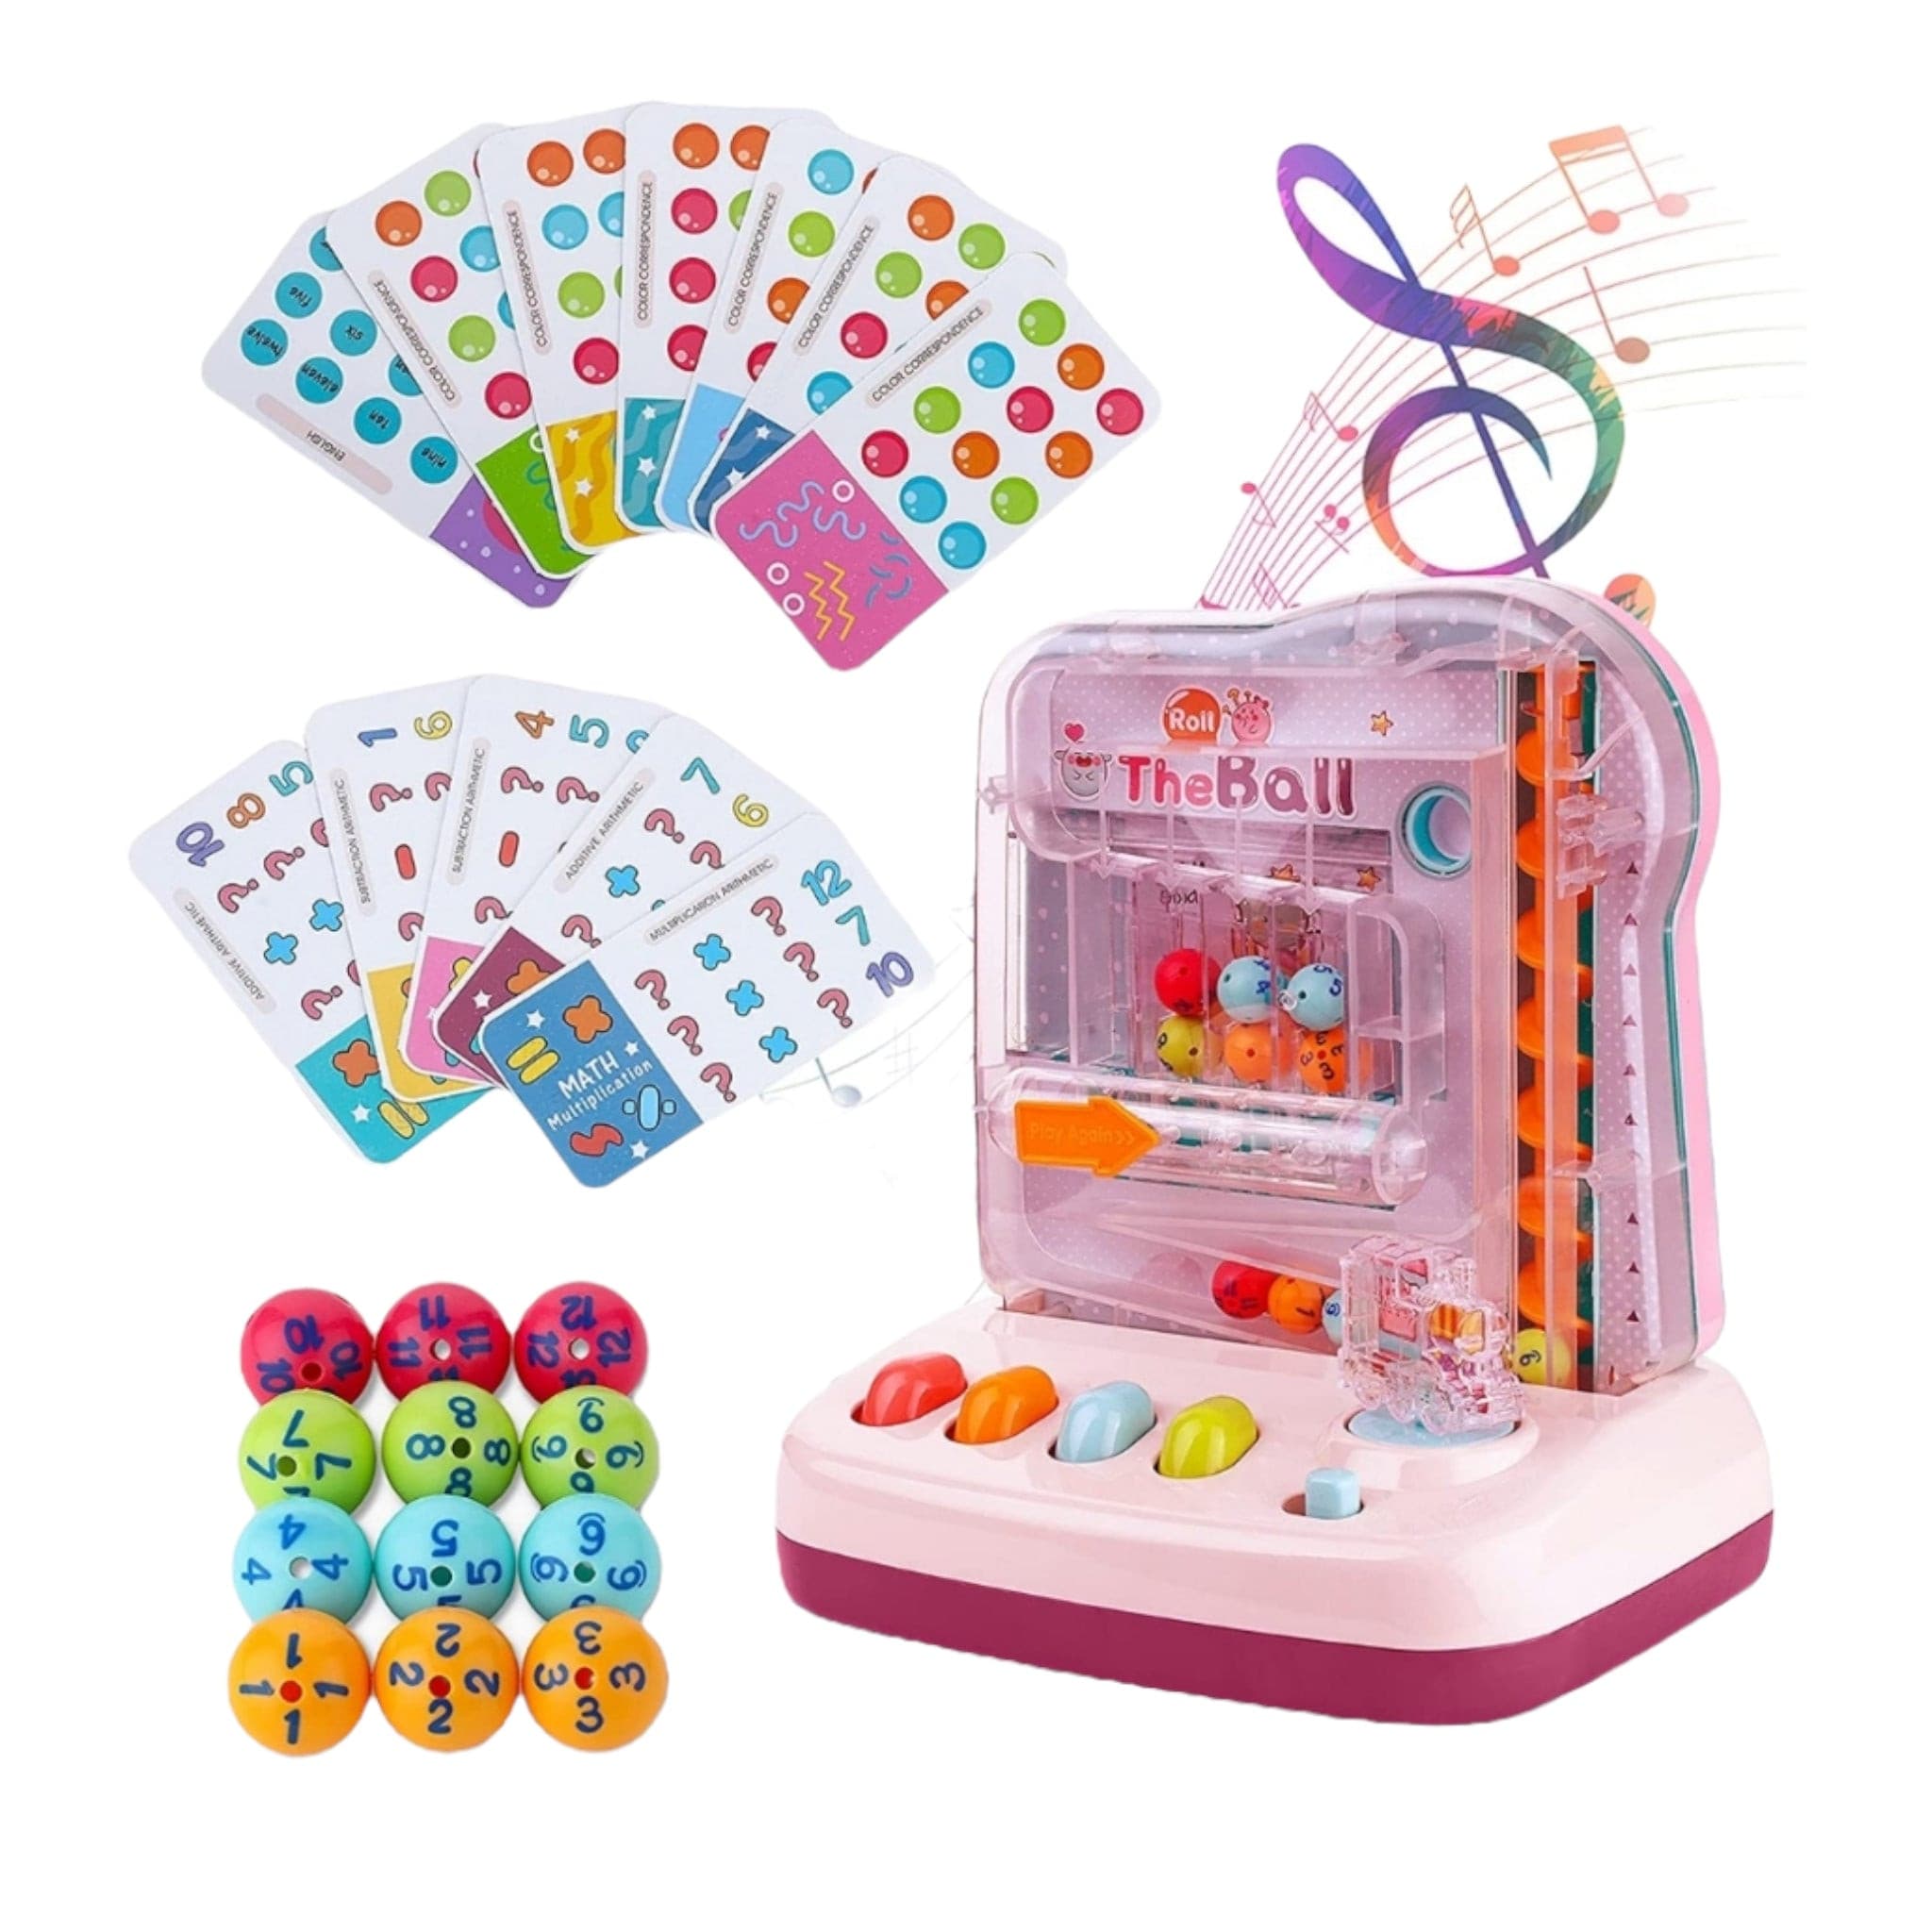 Roll The Ball Arrange The Colors Perception and Logical Thinking Puzzle Game For Toddlers And Kids Machine